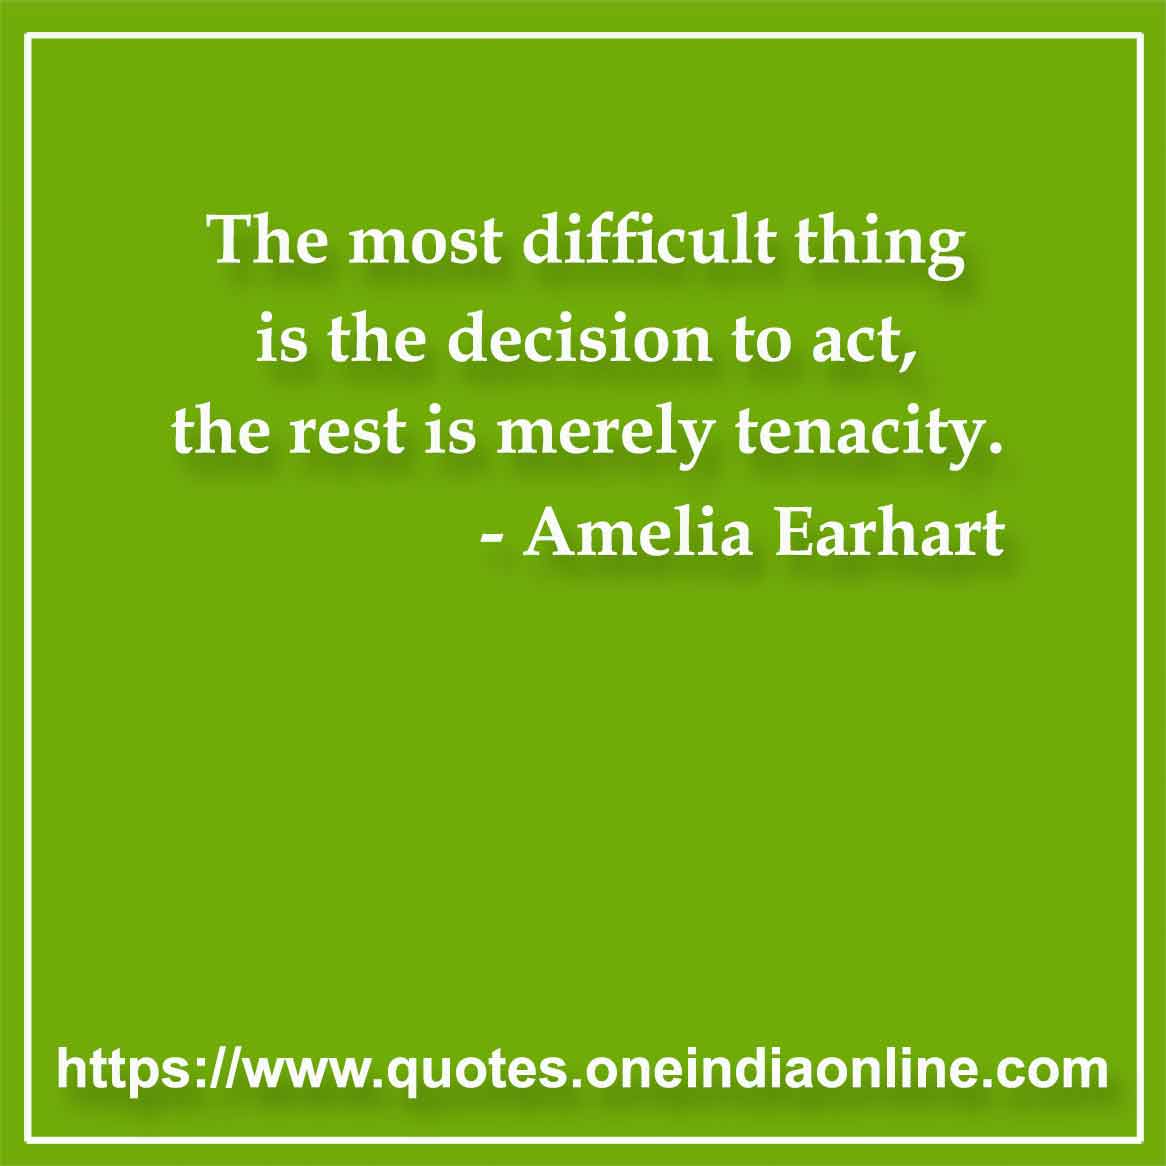 The most difficult thing is the decision to act, the rest is merely tenacity. 

-  Amelia Earhart